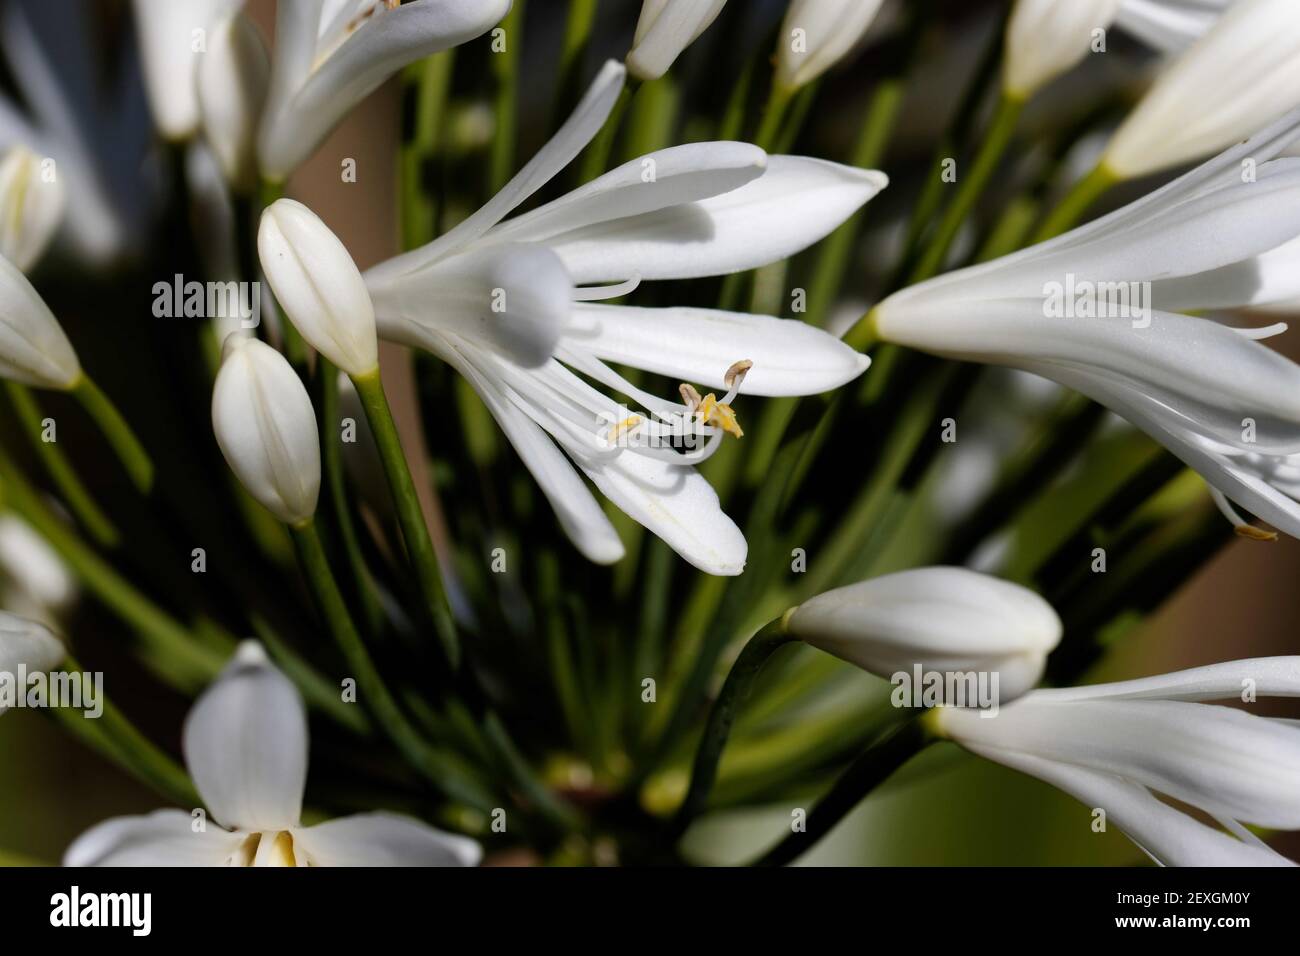 Agapanthus is the only genus in the subfamily Agapanthoideae of the flowering plant family Amaryllidaceae. Stock Photo